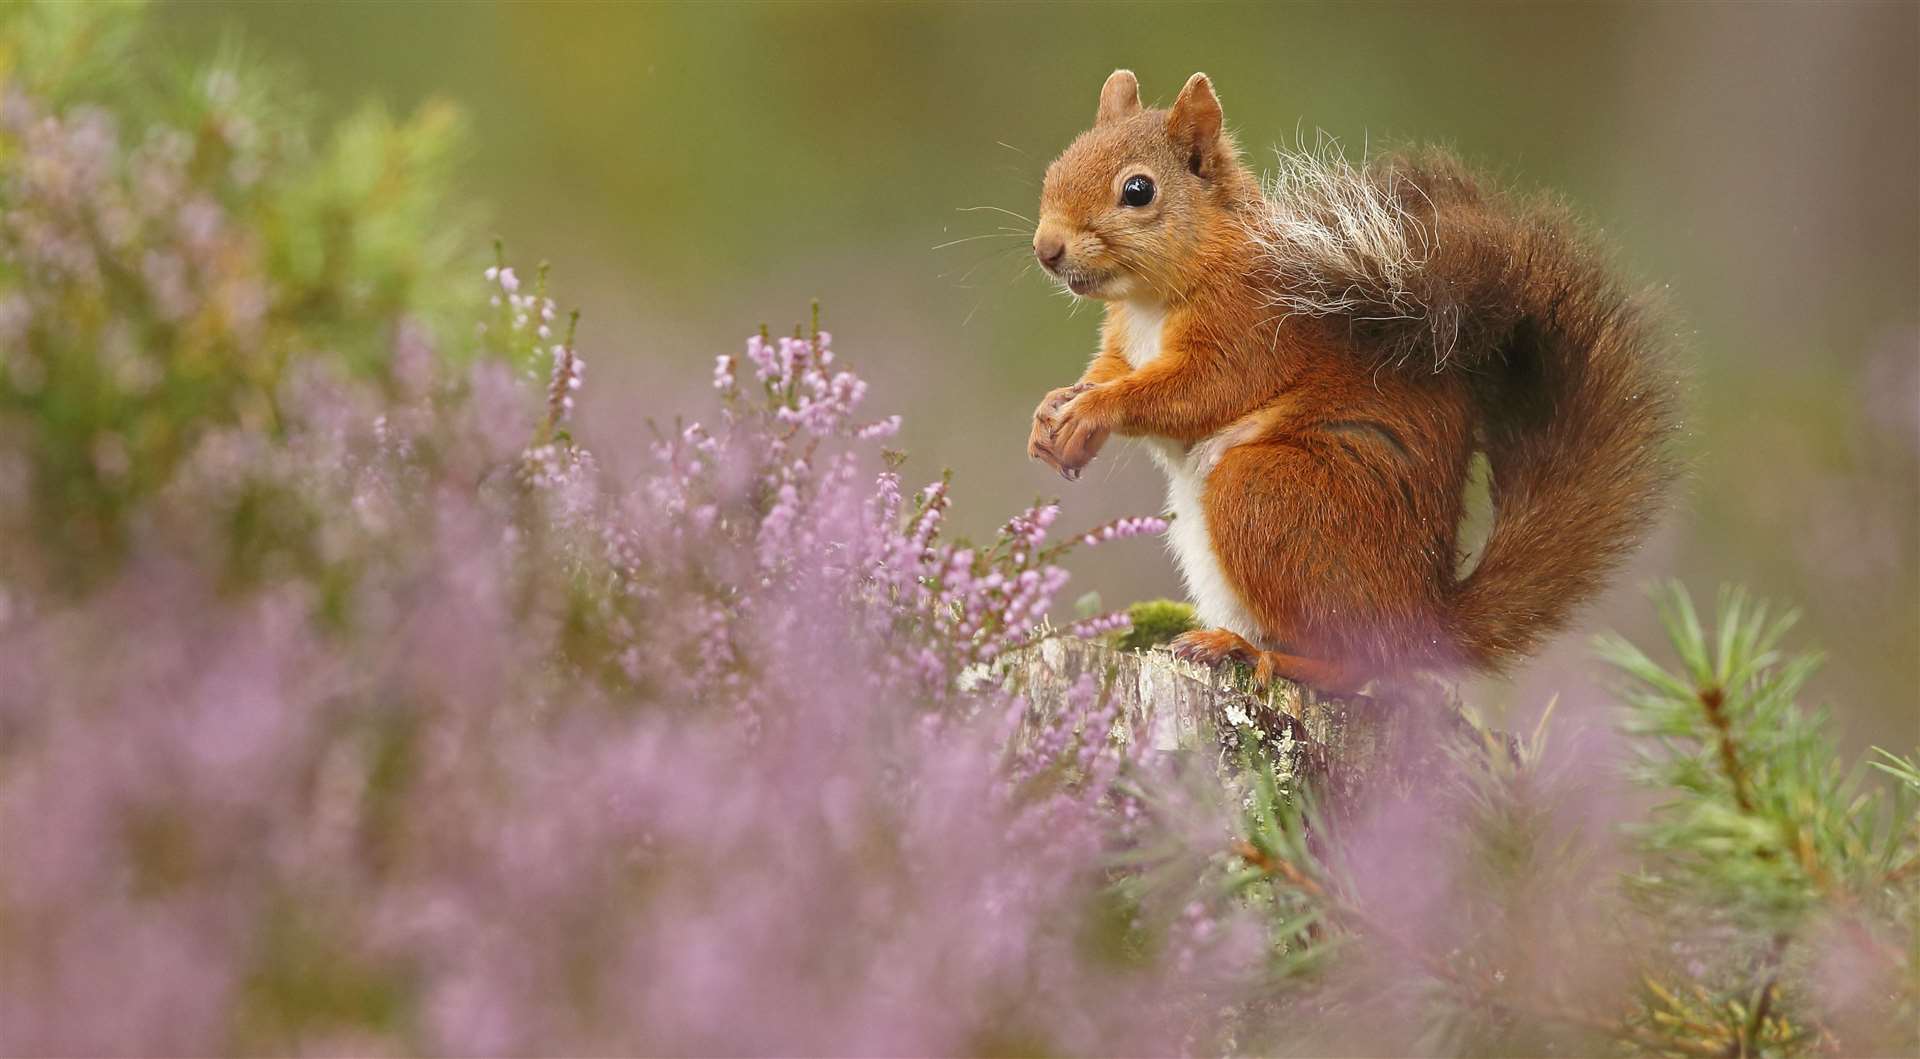 British Wildlife Photography Awards images on show at Bodiam Castle Picture: Neil McIntyre